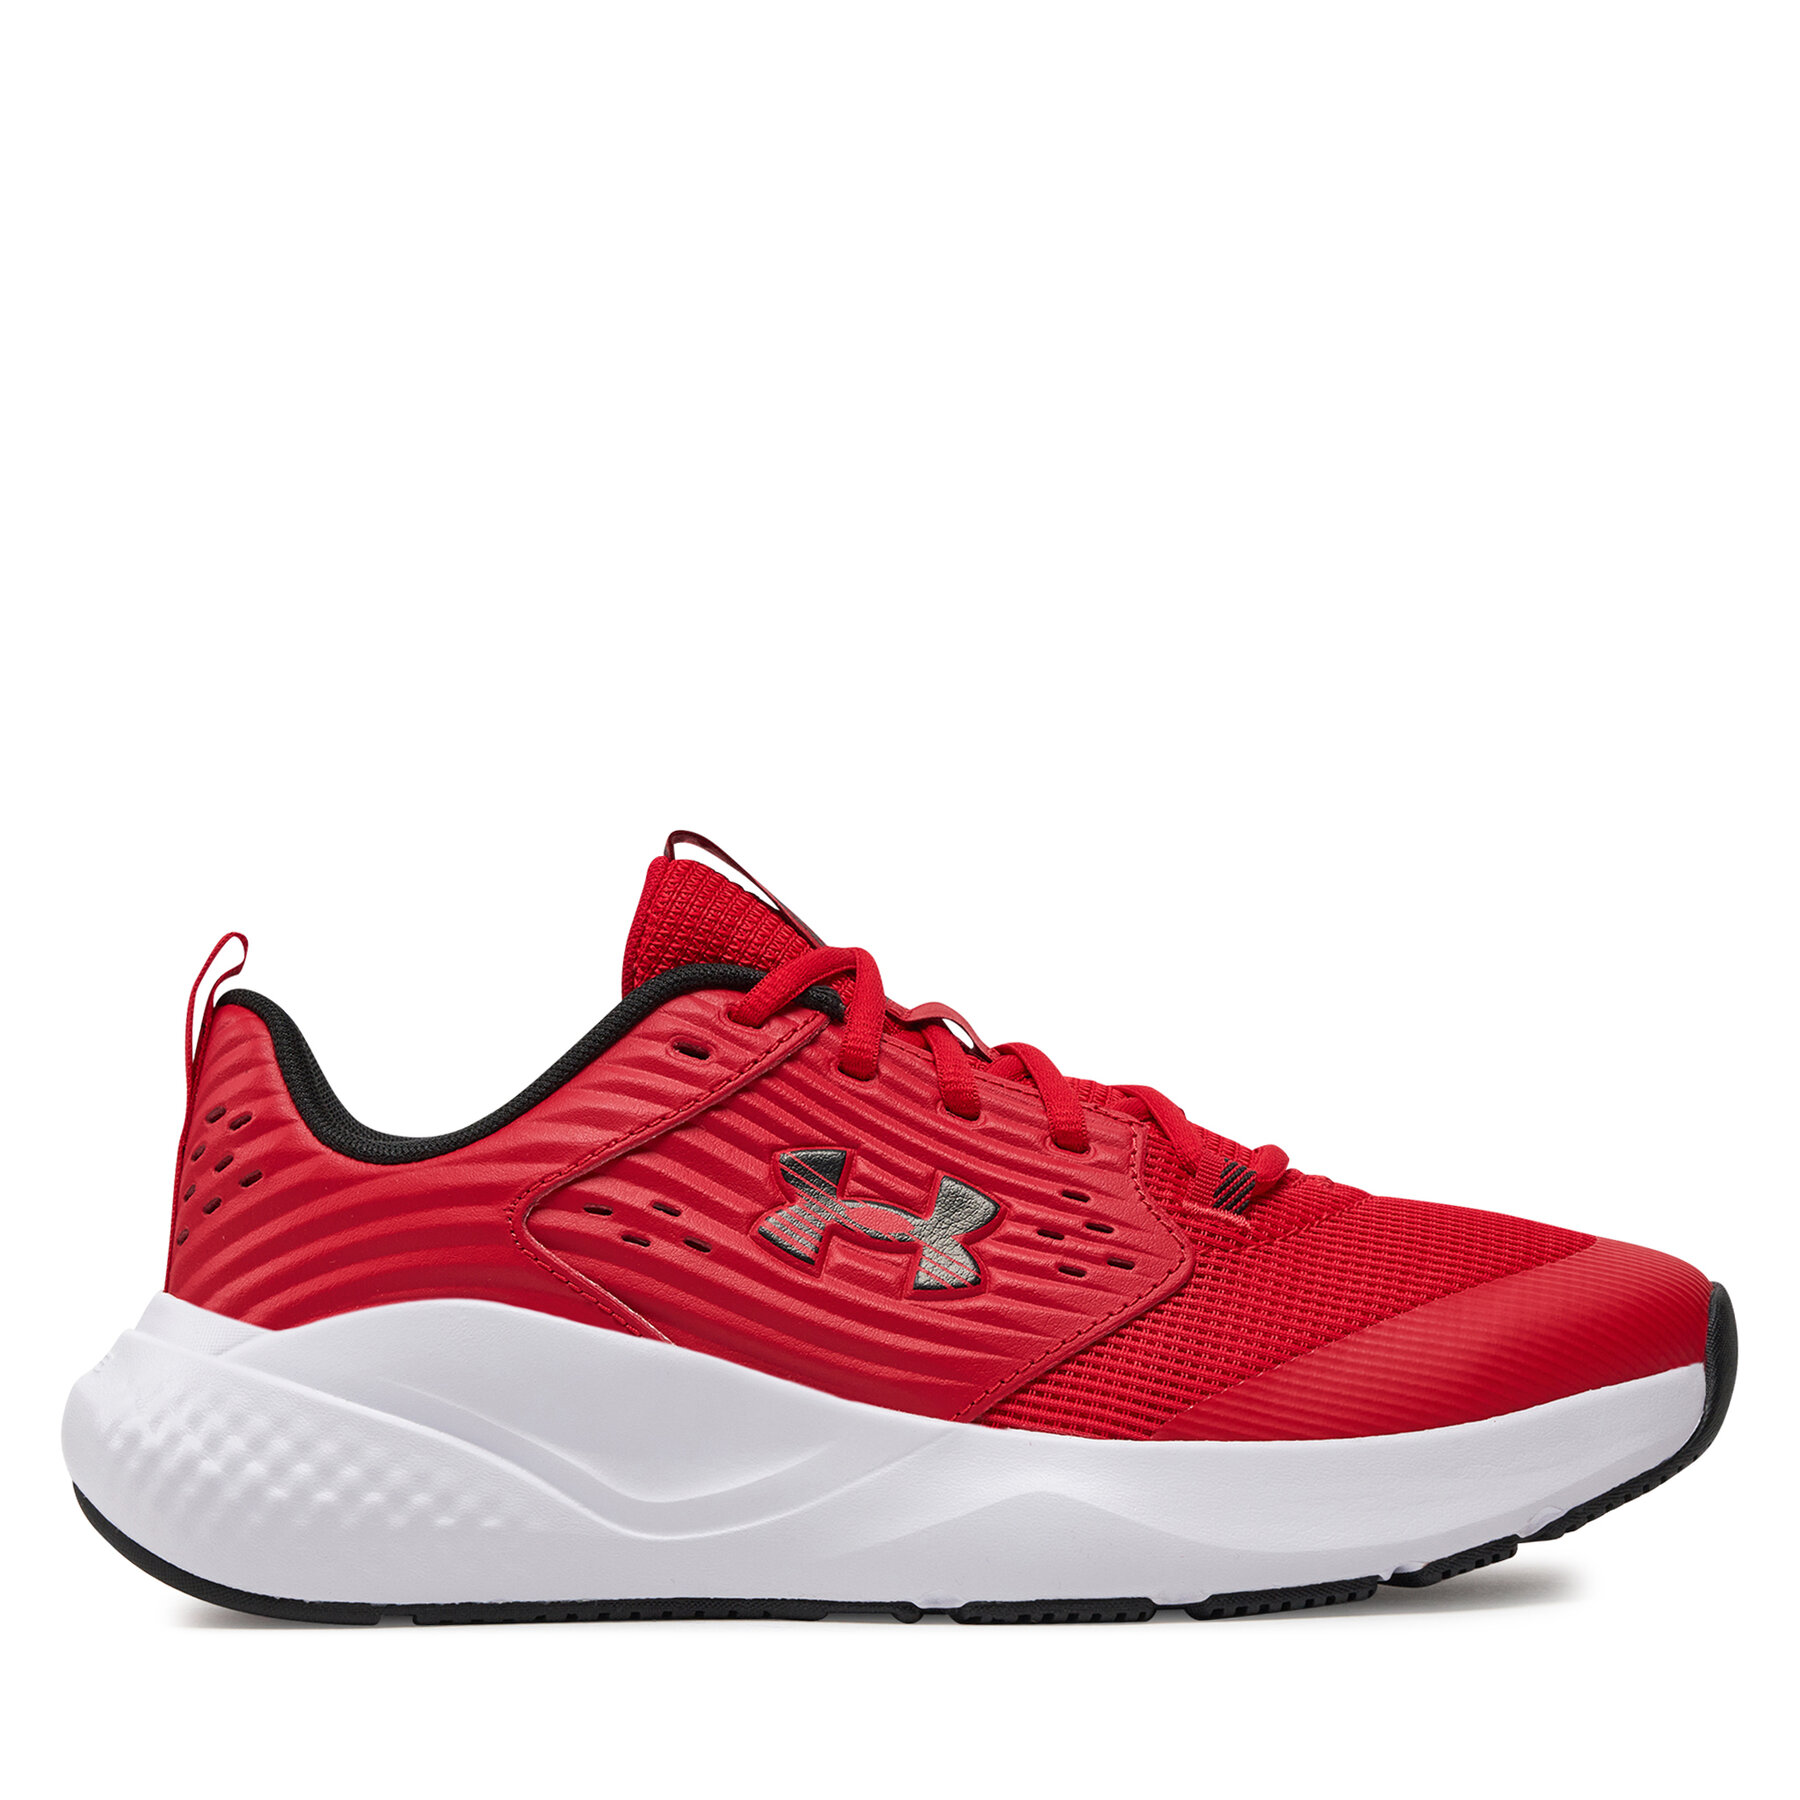 Schuhe Under Armour Ua Charged Commit Tr 4 3026017-601 Red/White/Black von Under Armour